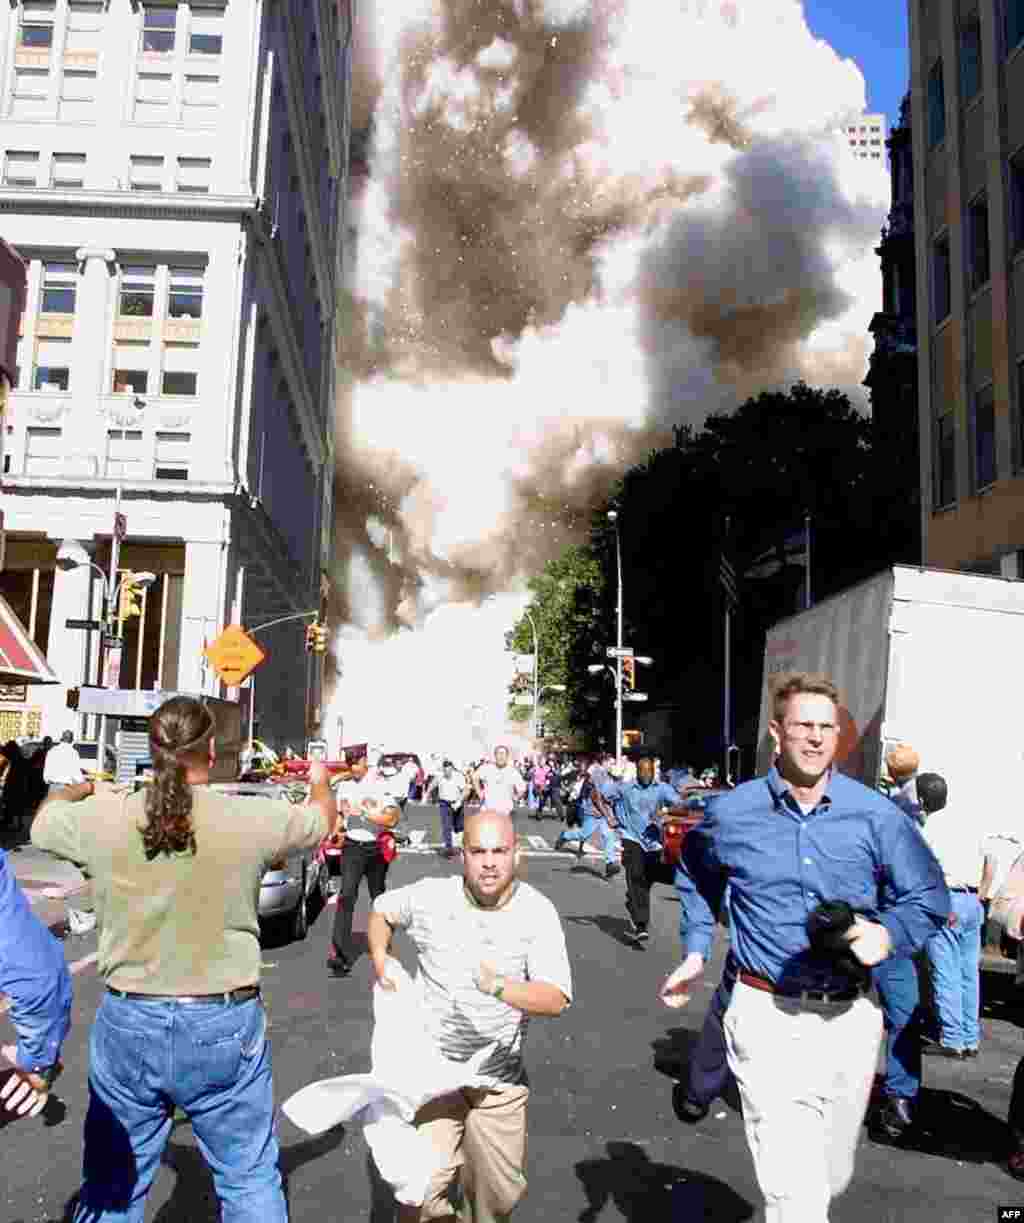 (FILE) Pedestrians run from the scene as one of the World Trade Center Towers collapses 11 September, 2001 in New York following a terrorist plane crash on the twin towers. AFP PHOTO Doug KANTER (Photo by DOUG KANTER / AFP)